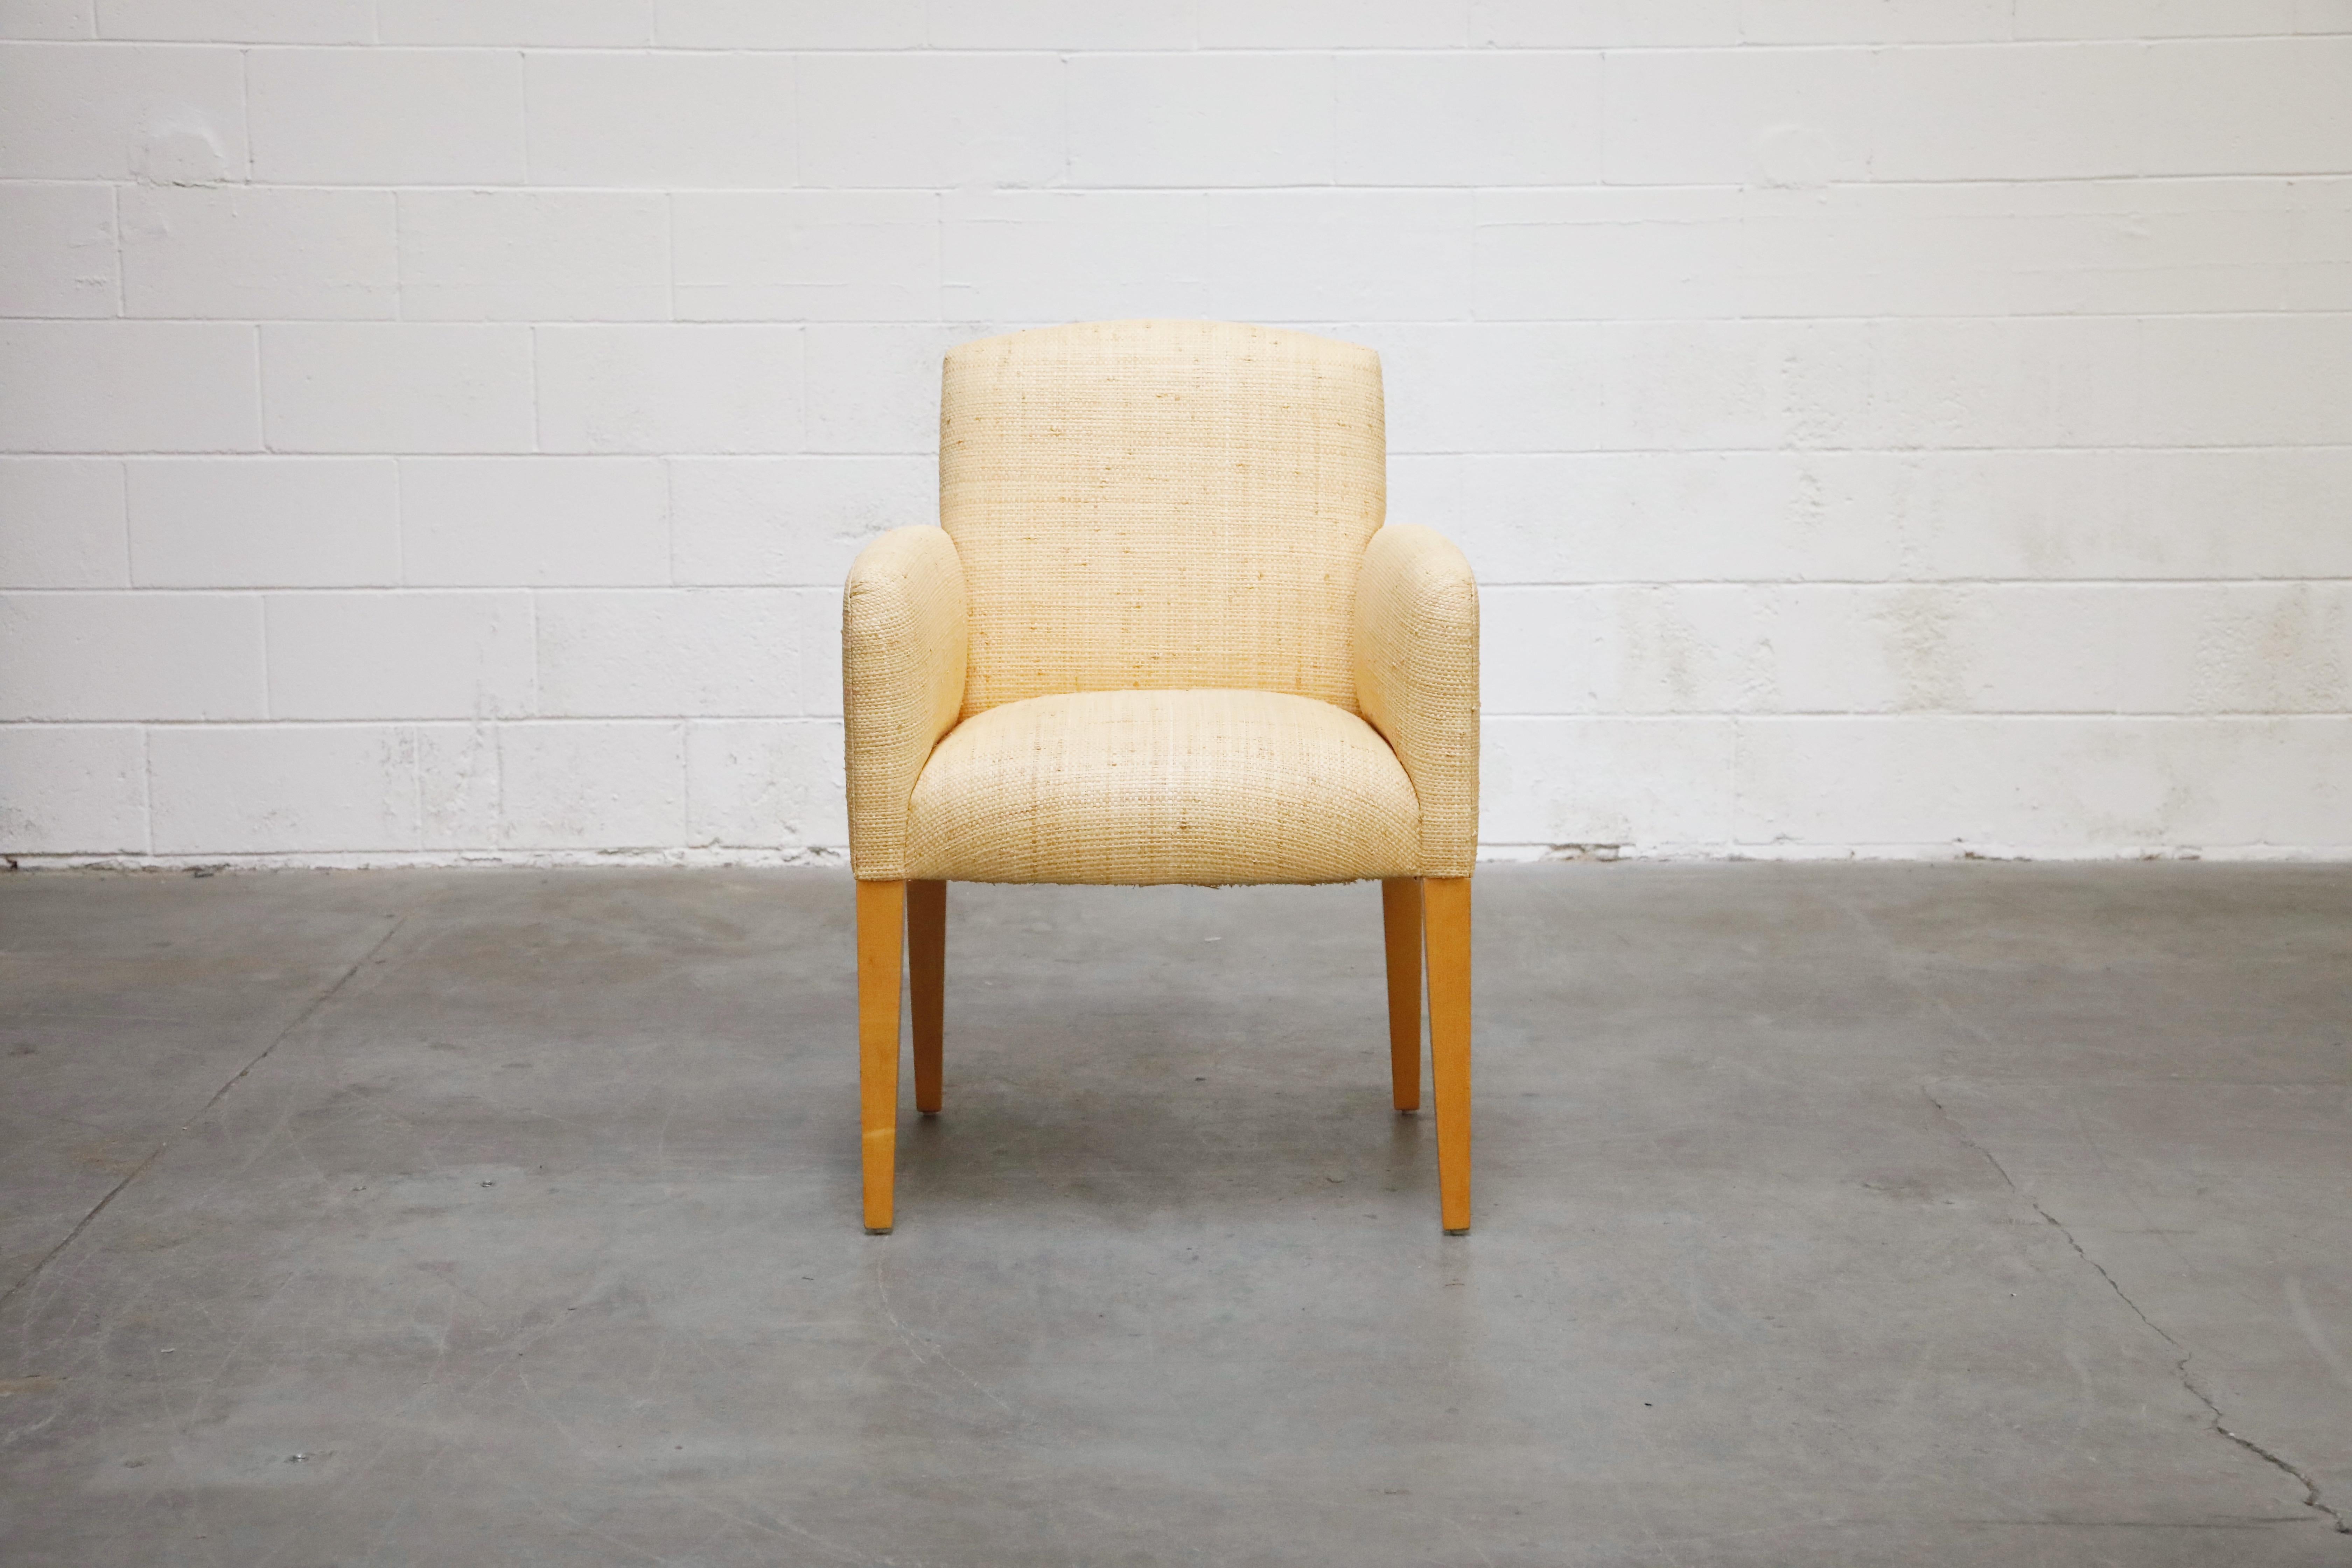 This lovely custom order Plaza armchair from Donghia features beautiful grass cloth fabric upholstery over wood legs. From the original receipt, we found that this chair was custom upholstered in woven bleached grass cloth. The wood has been